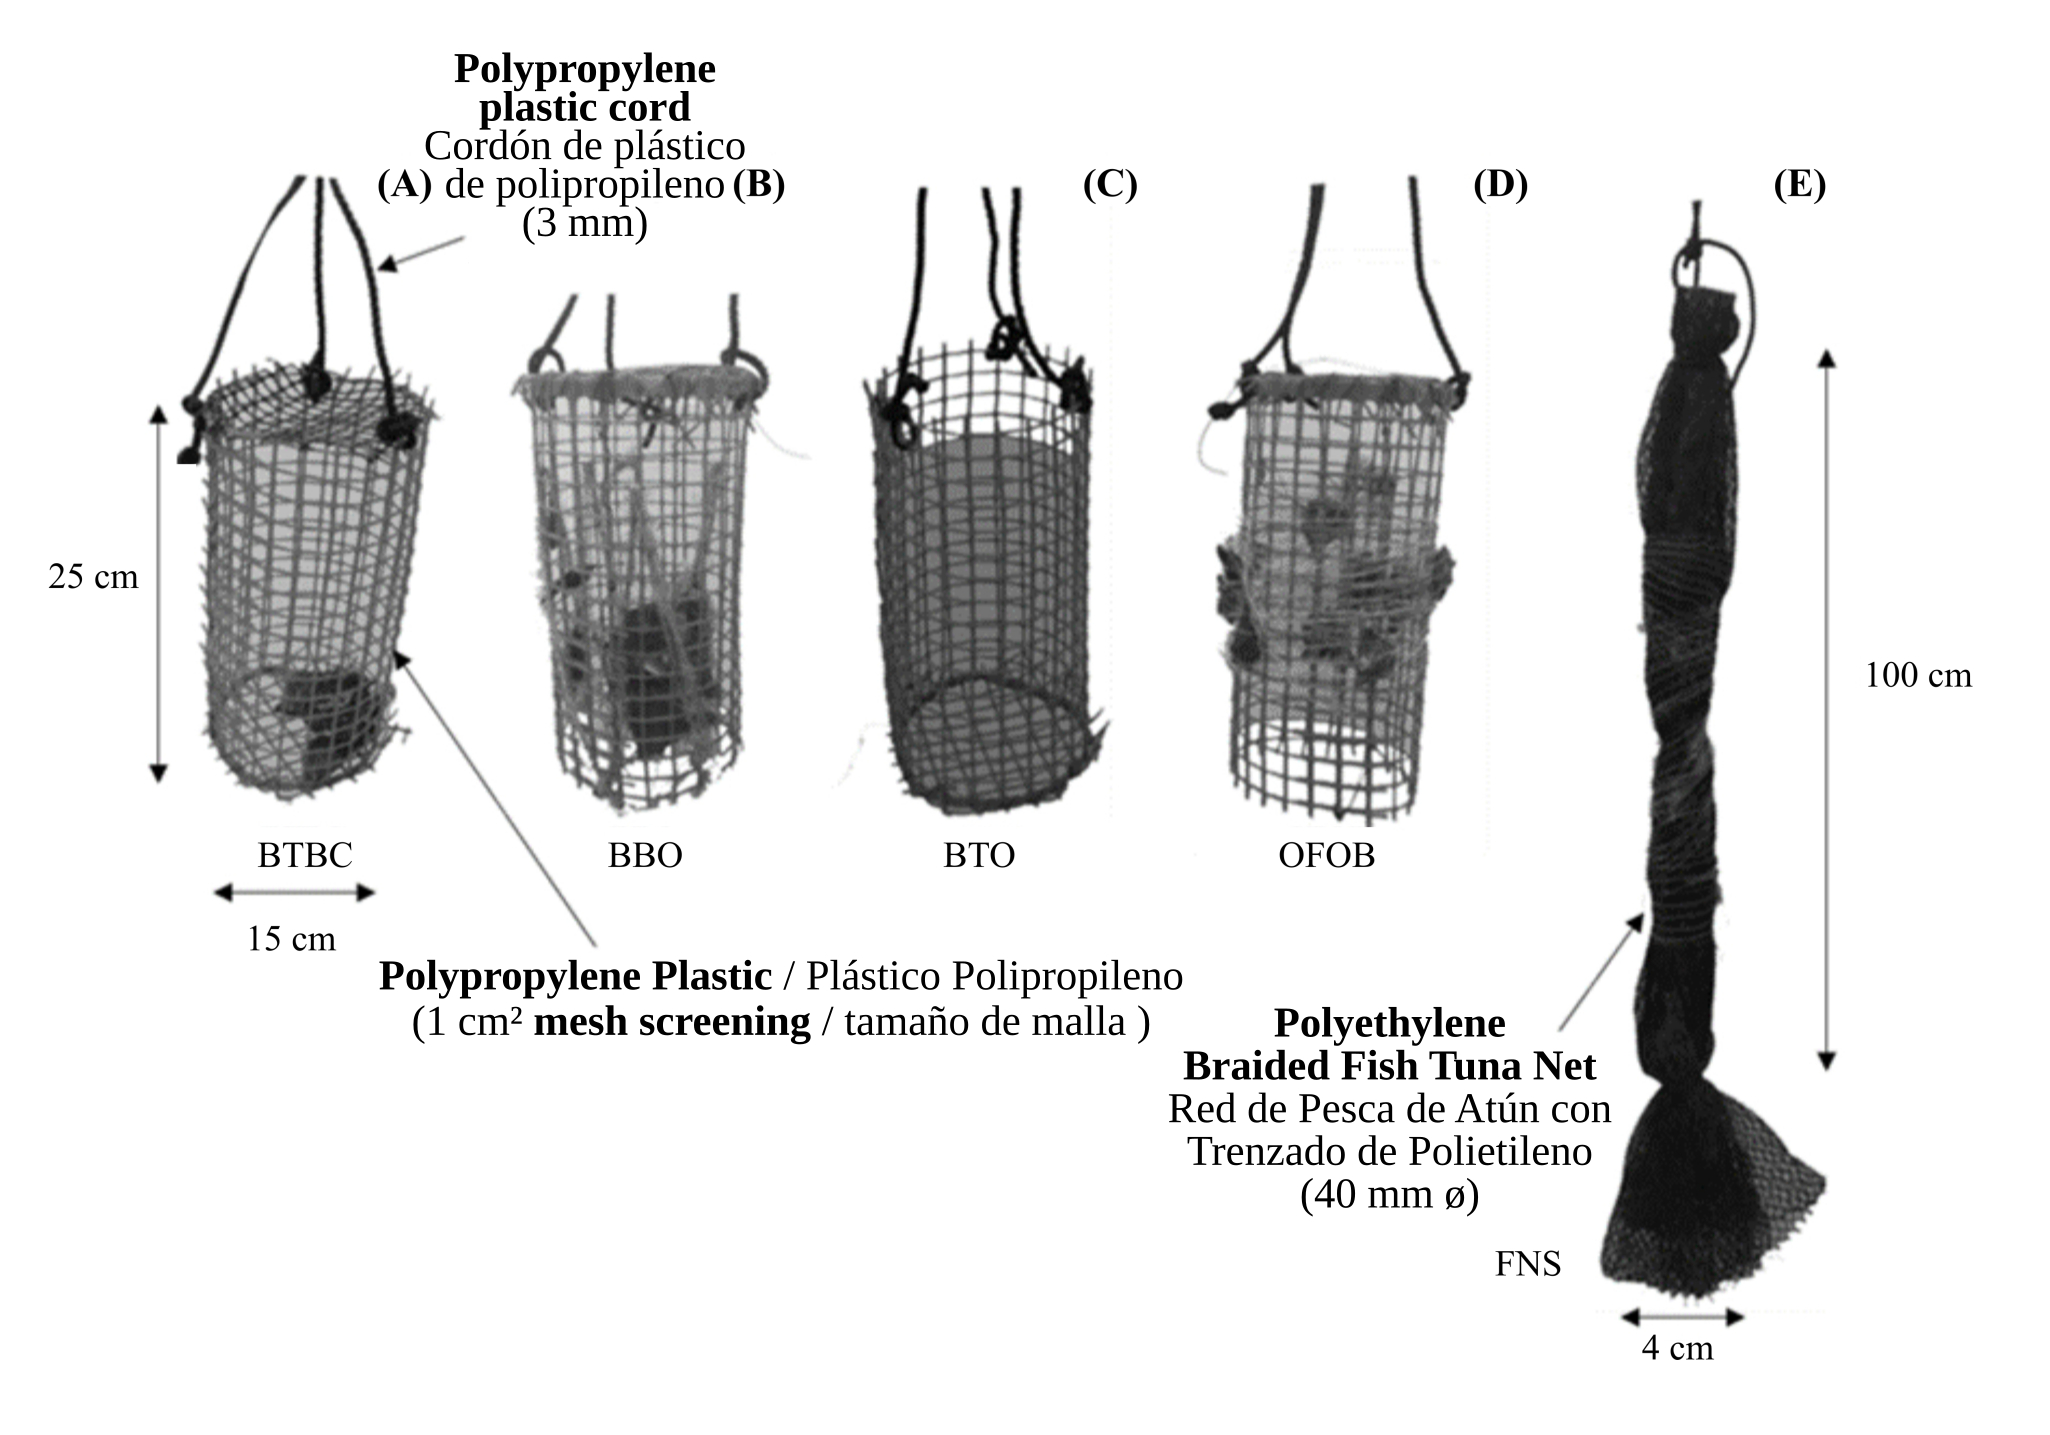 Different types of culture-hanging methods used for grow-out of juveniles of the winged pearl oyster P. colymbus with confined individuals: A) Baskets top and bottom closed (BTBC); B) Baskets bottom opened (BBO); C) Baskets top opened (BTO); and unconfined individuals: D) Oysters fixed over baskets (OFOB) and E) Fishing net strings (FNS).